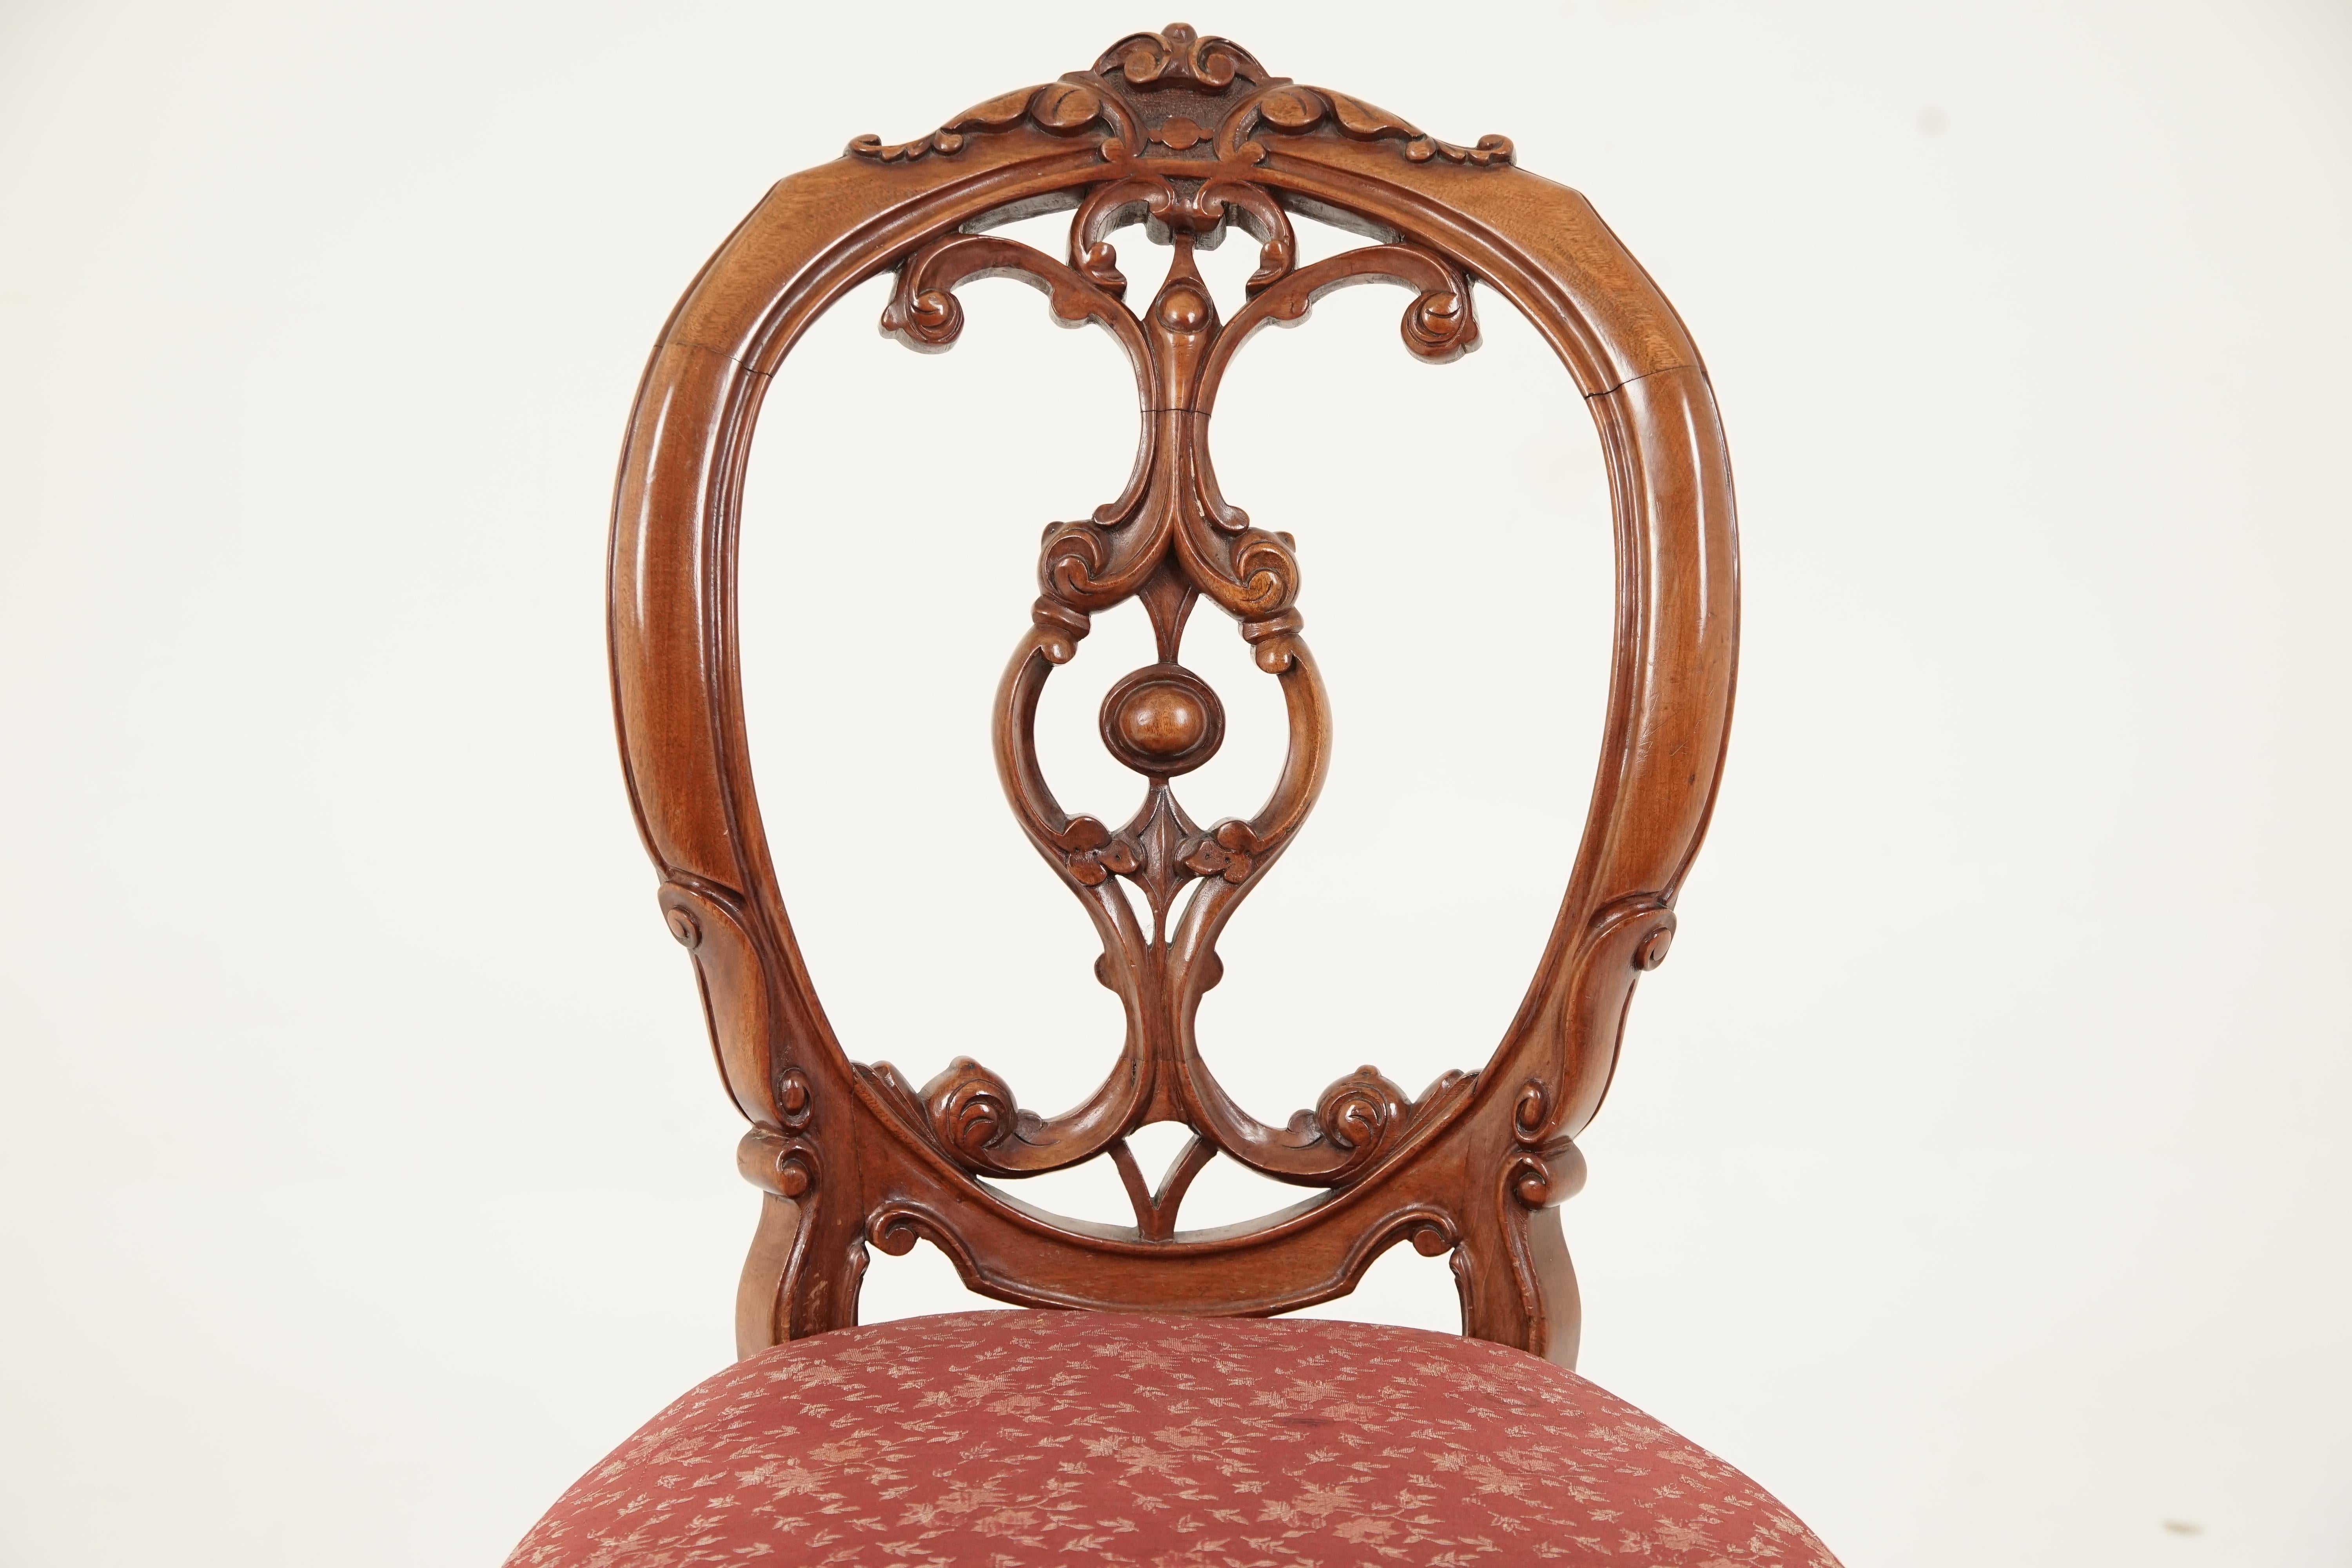 Antique Victorian Walnut Carved Side Chair, Parlor Chair, Scotland 1870, B2744

Scotland 1870
Solid Walnut 
Original Finish 
Attractive single walnut chair
Carved top rail
Shaped back and decoration to the center
Upholstered seat
Standing on carved